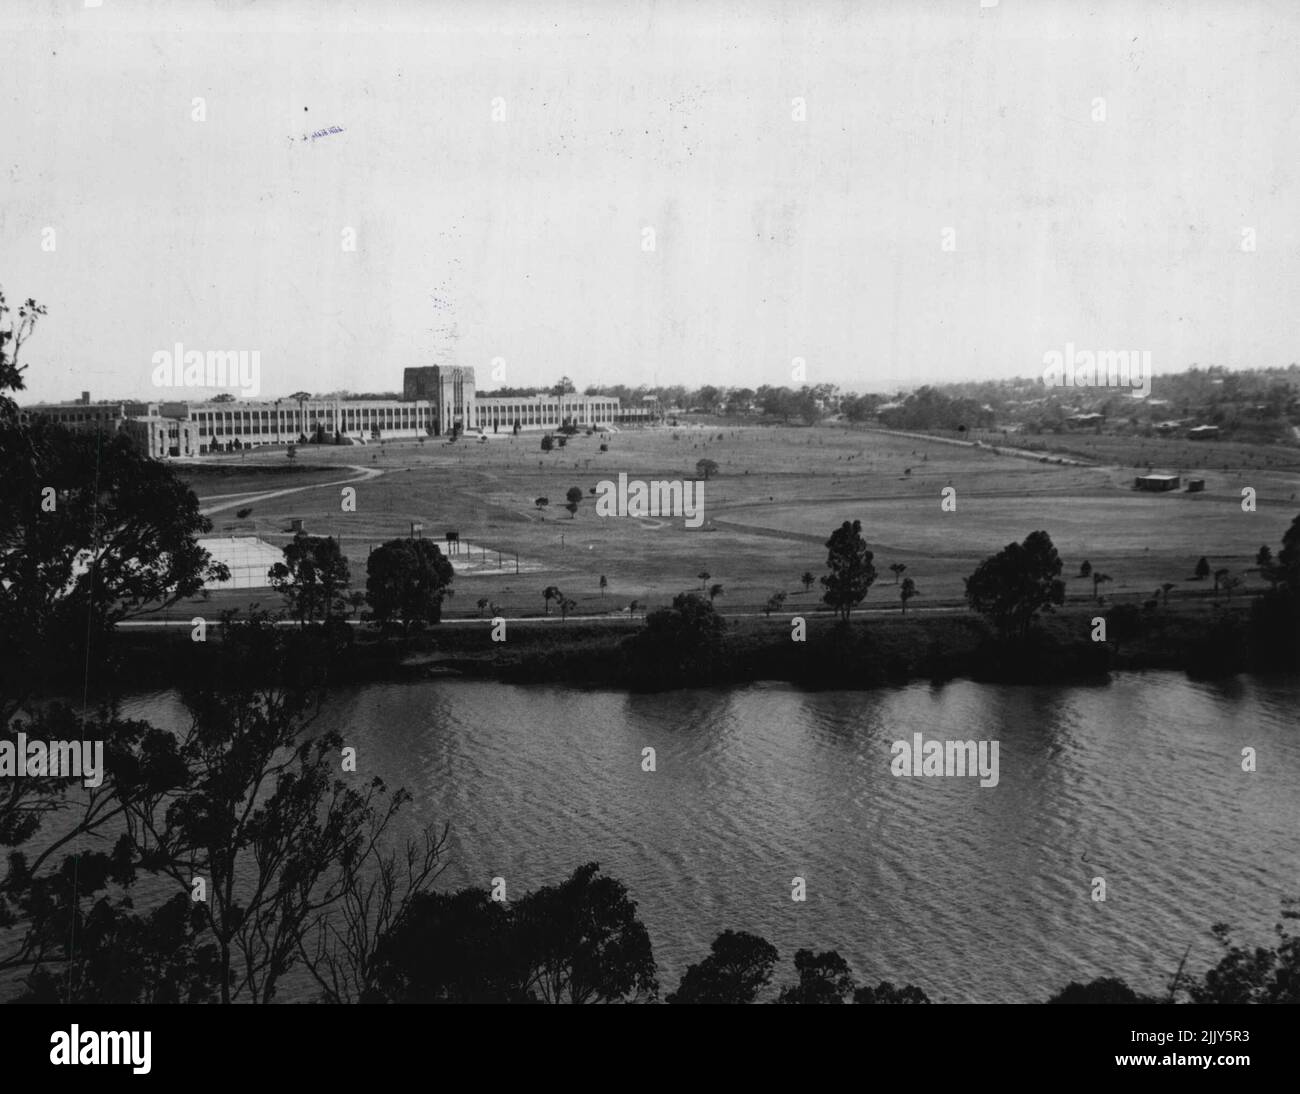 A view of Queensland new University, taken from Thomsons former home. The wide sweep of Coronation Park, and the proximity of the Brisbane River, inspired Thomson to boost the site in opposition to the one already selected by the University Senate....... One of Thomson's major triumphs was having Queensland's new university established at St. Lucia, just across the Brisbane River form his former home. May 07, 1952. (Photo by David R. Jones). Stock Photo